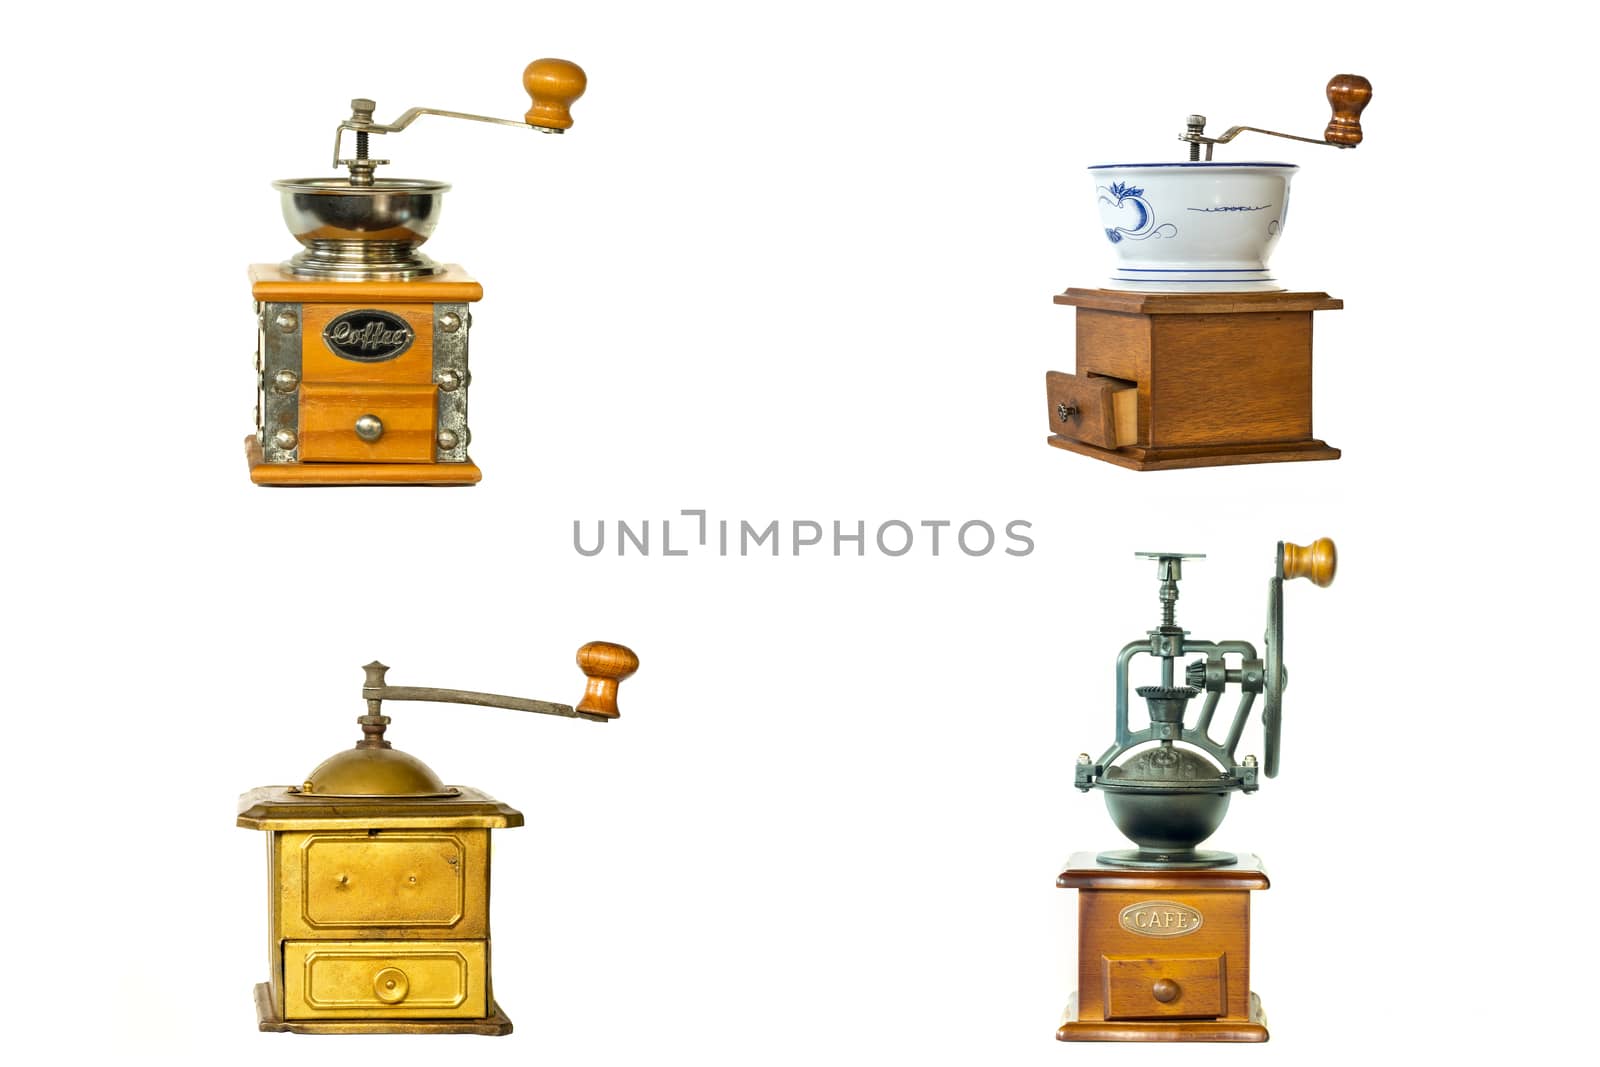 a collection of vintage coffee grinders in wood, ceramic, and metal, isolated on white background